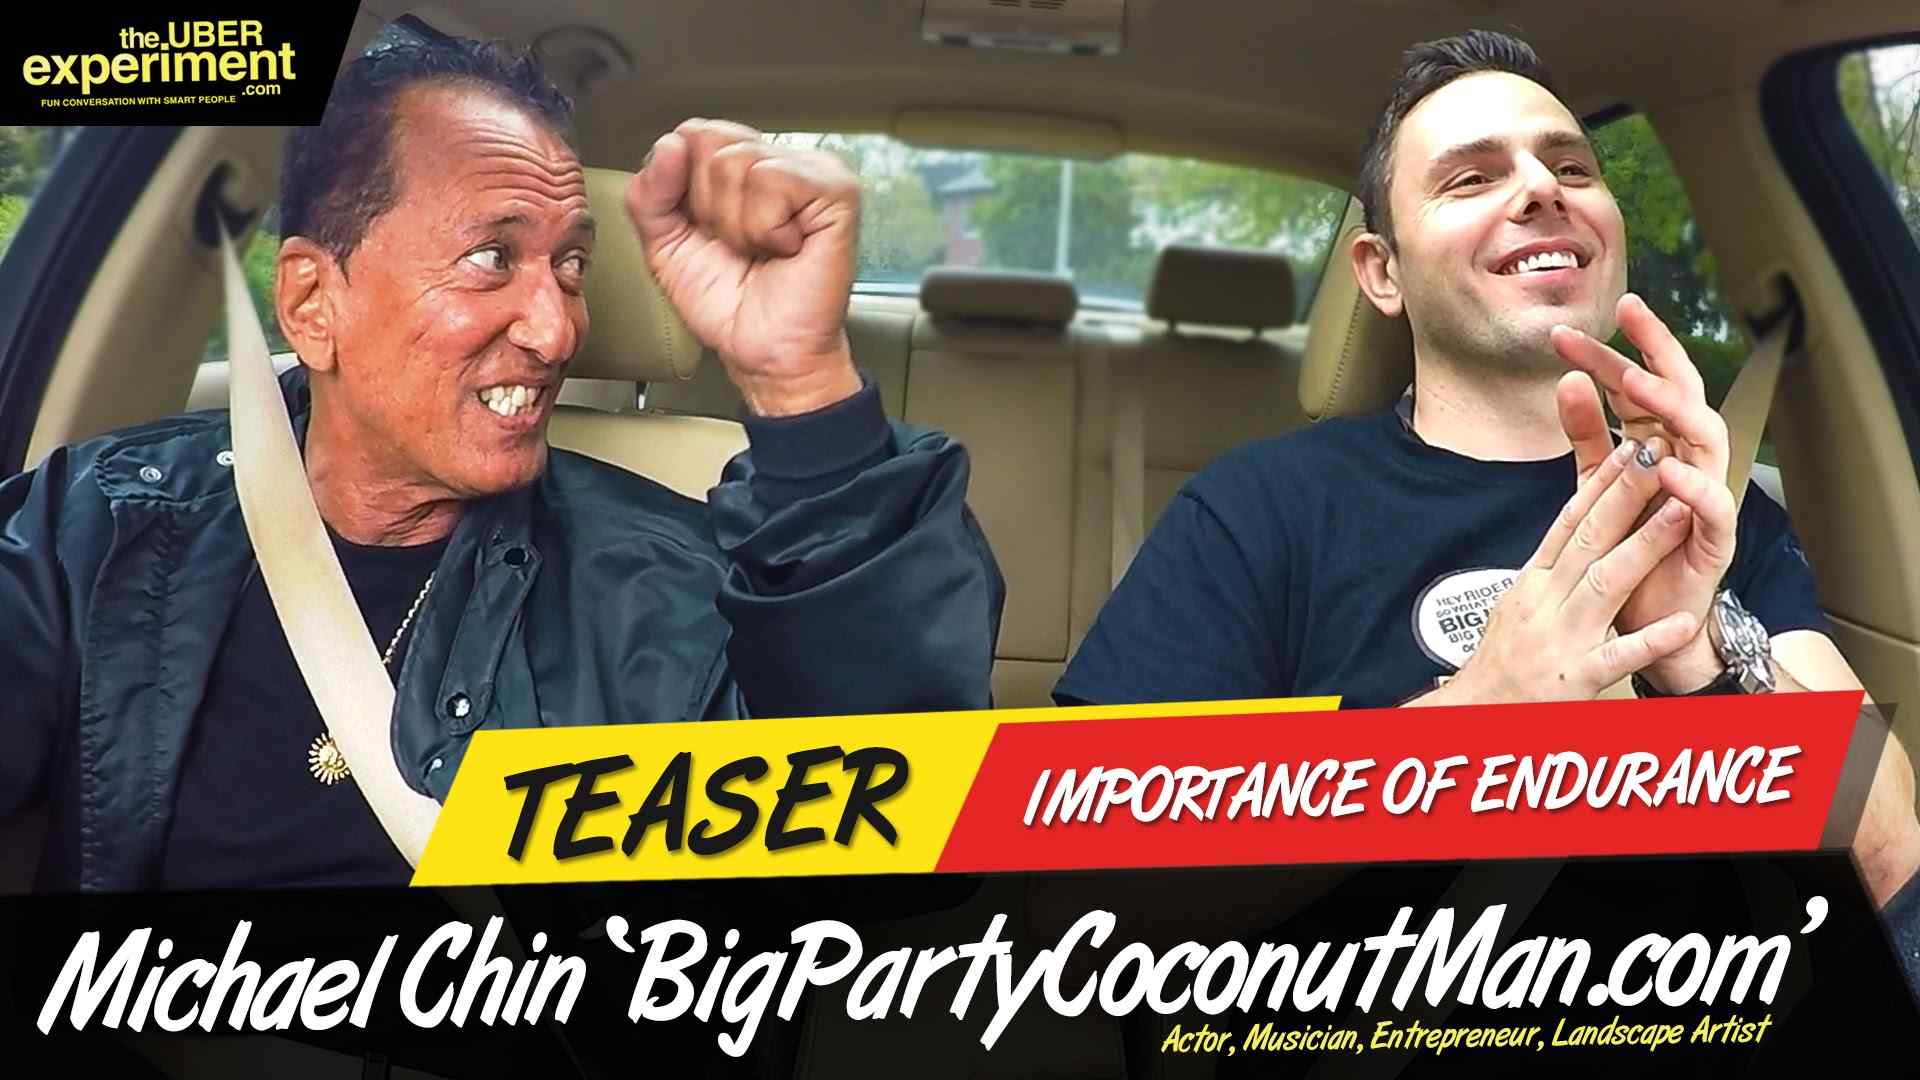 IMPORTANCE OF ENDURANCE - Actor, Musician, Big Party Coconut Man MICHAEL CHIN on The UBER Experiment